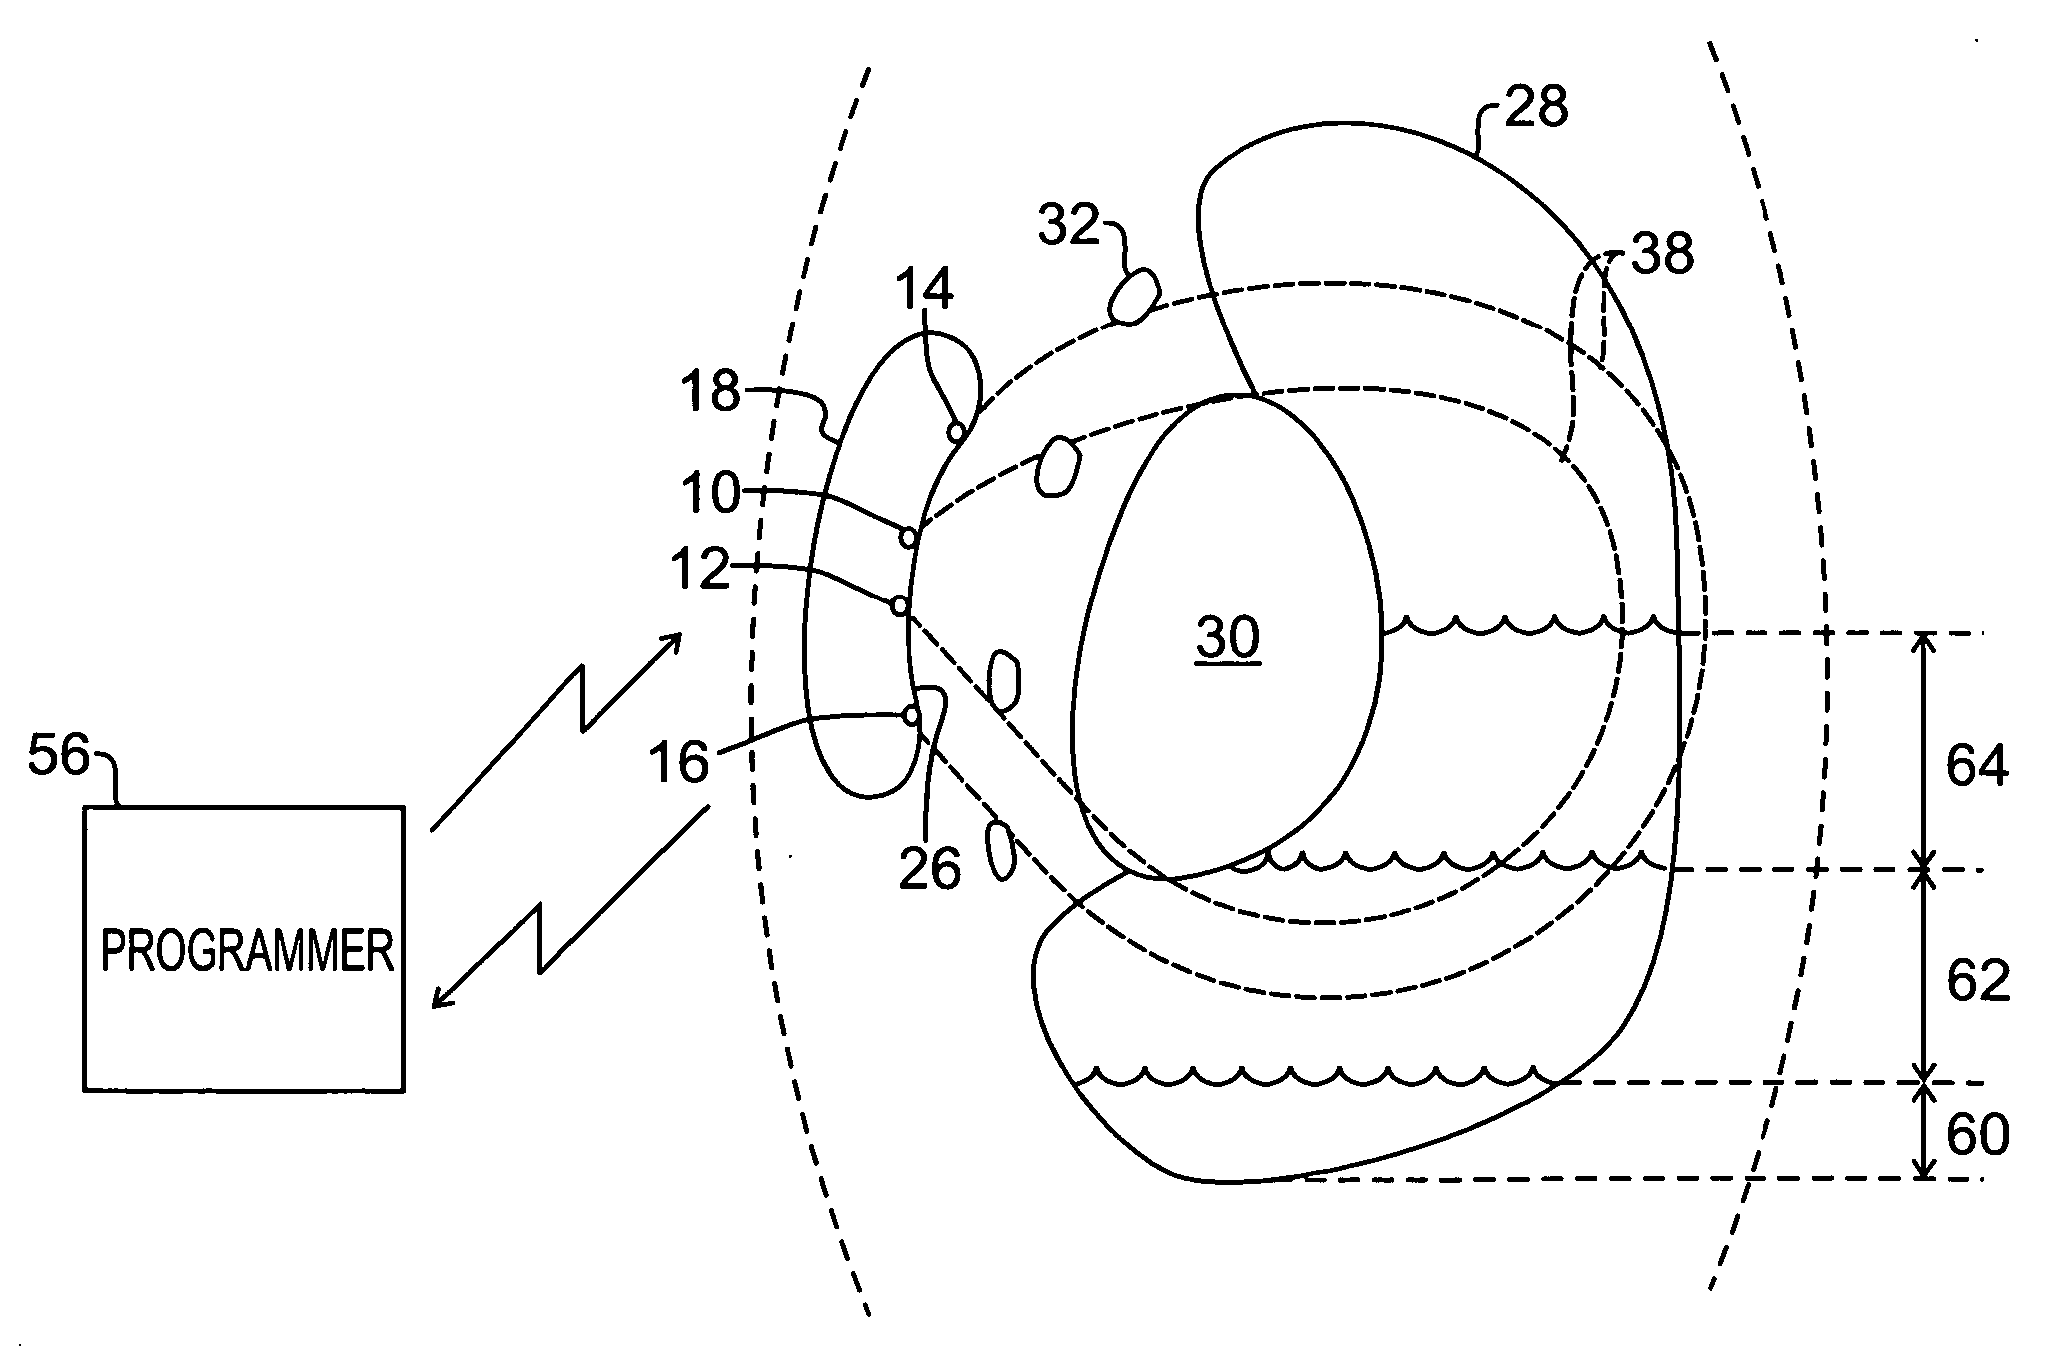 Remote control of implantable device through medical implant communication service band